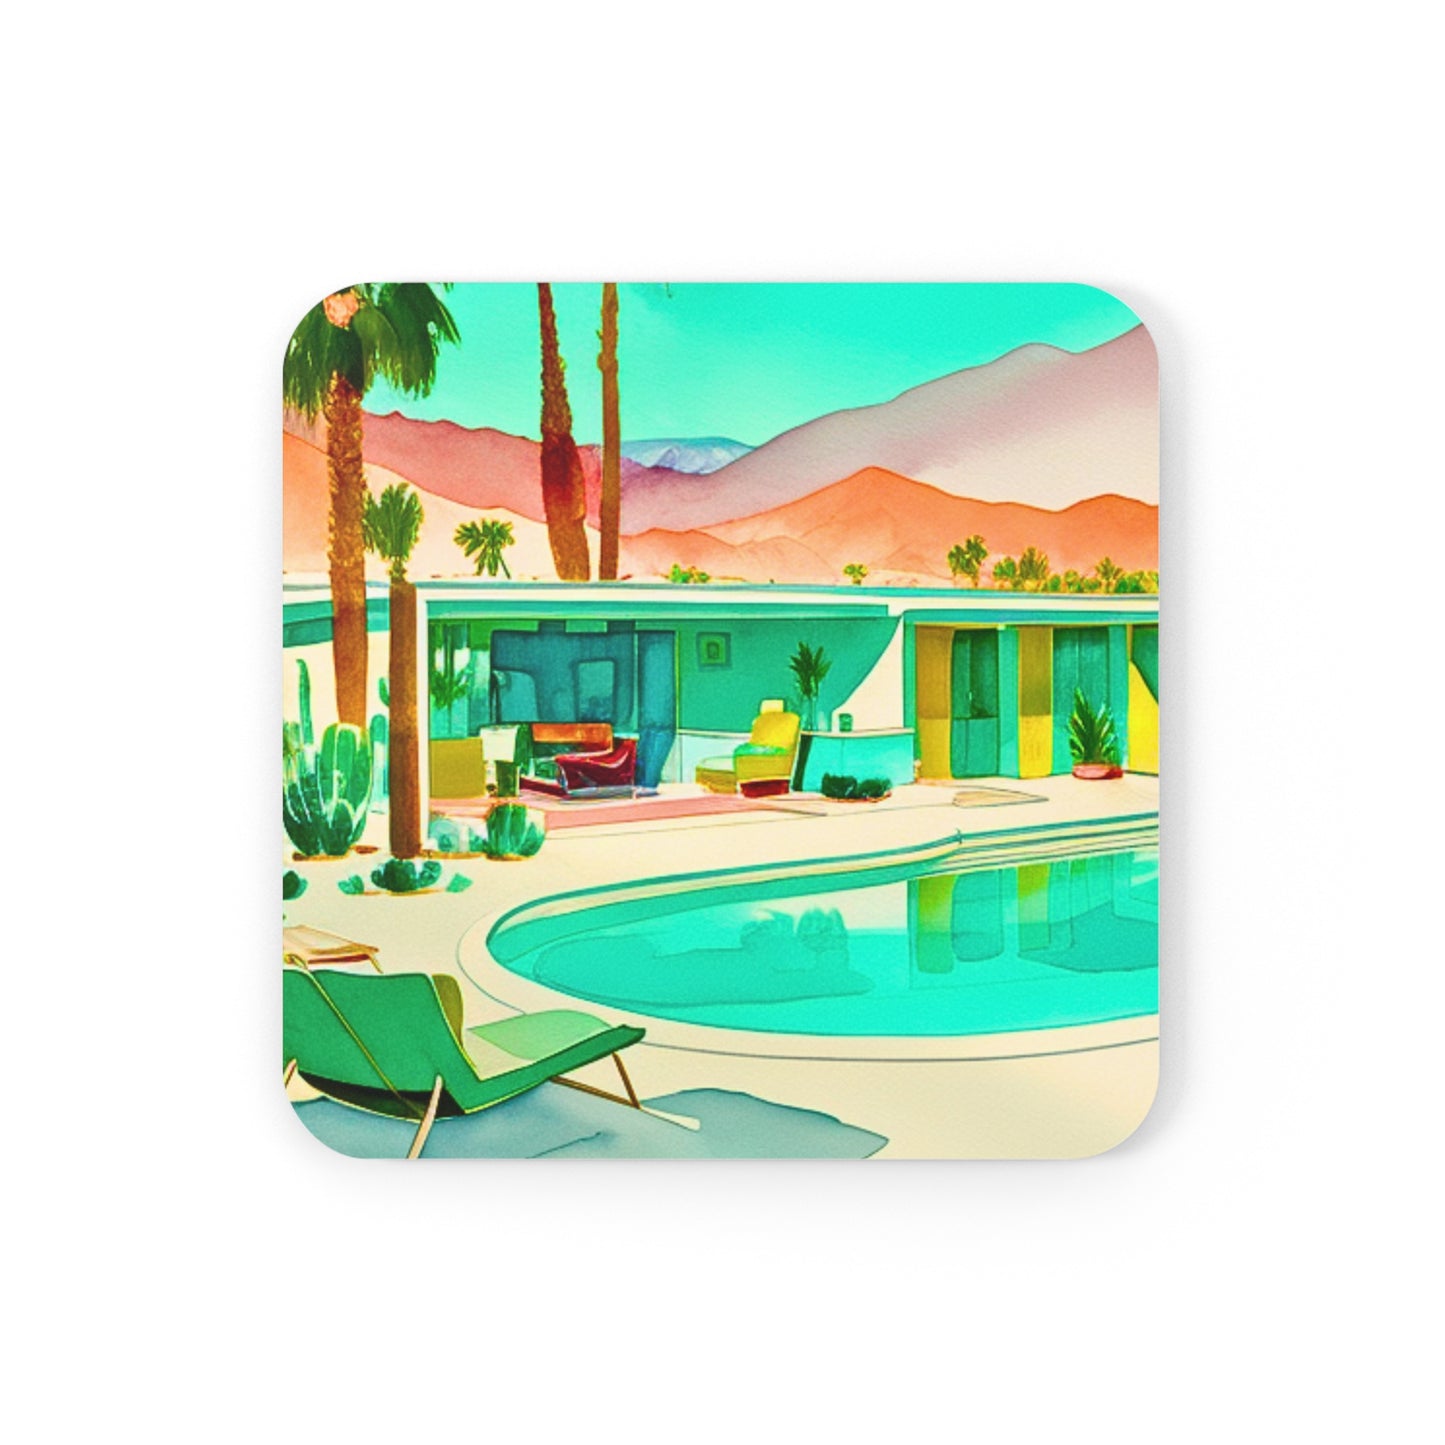 Weekend in the Palm Springs Desert Midcentury Modern Motel Cocktail Party Entertaining Corkwood Coaster Set